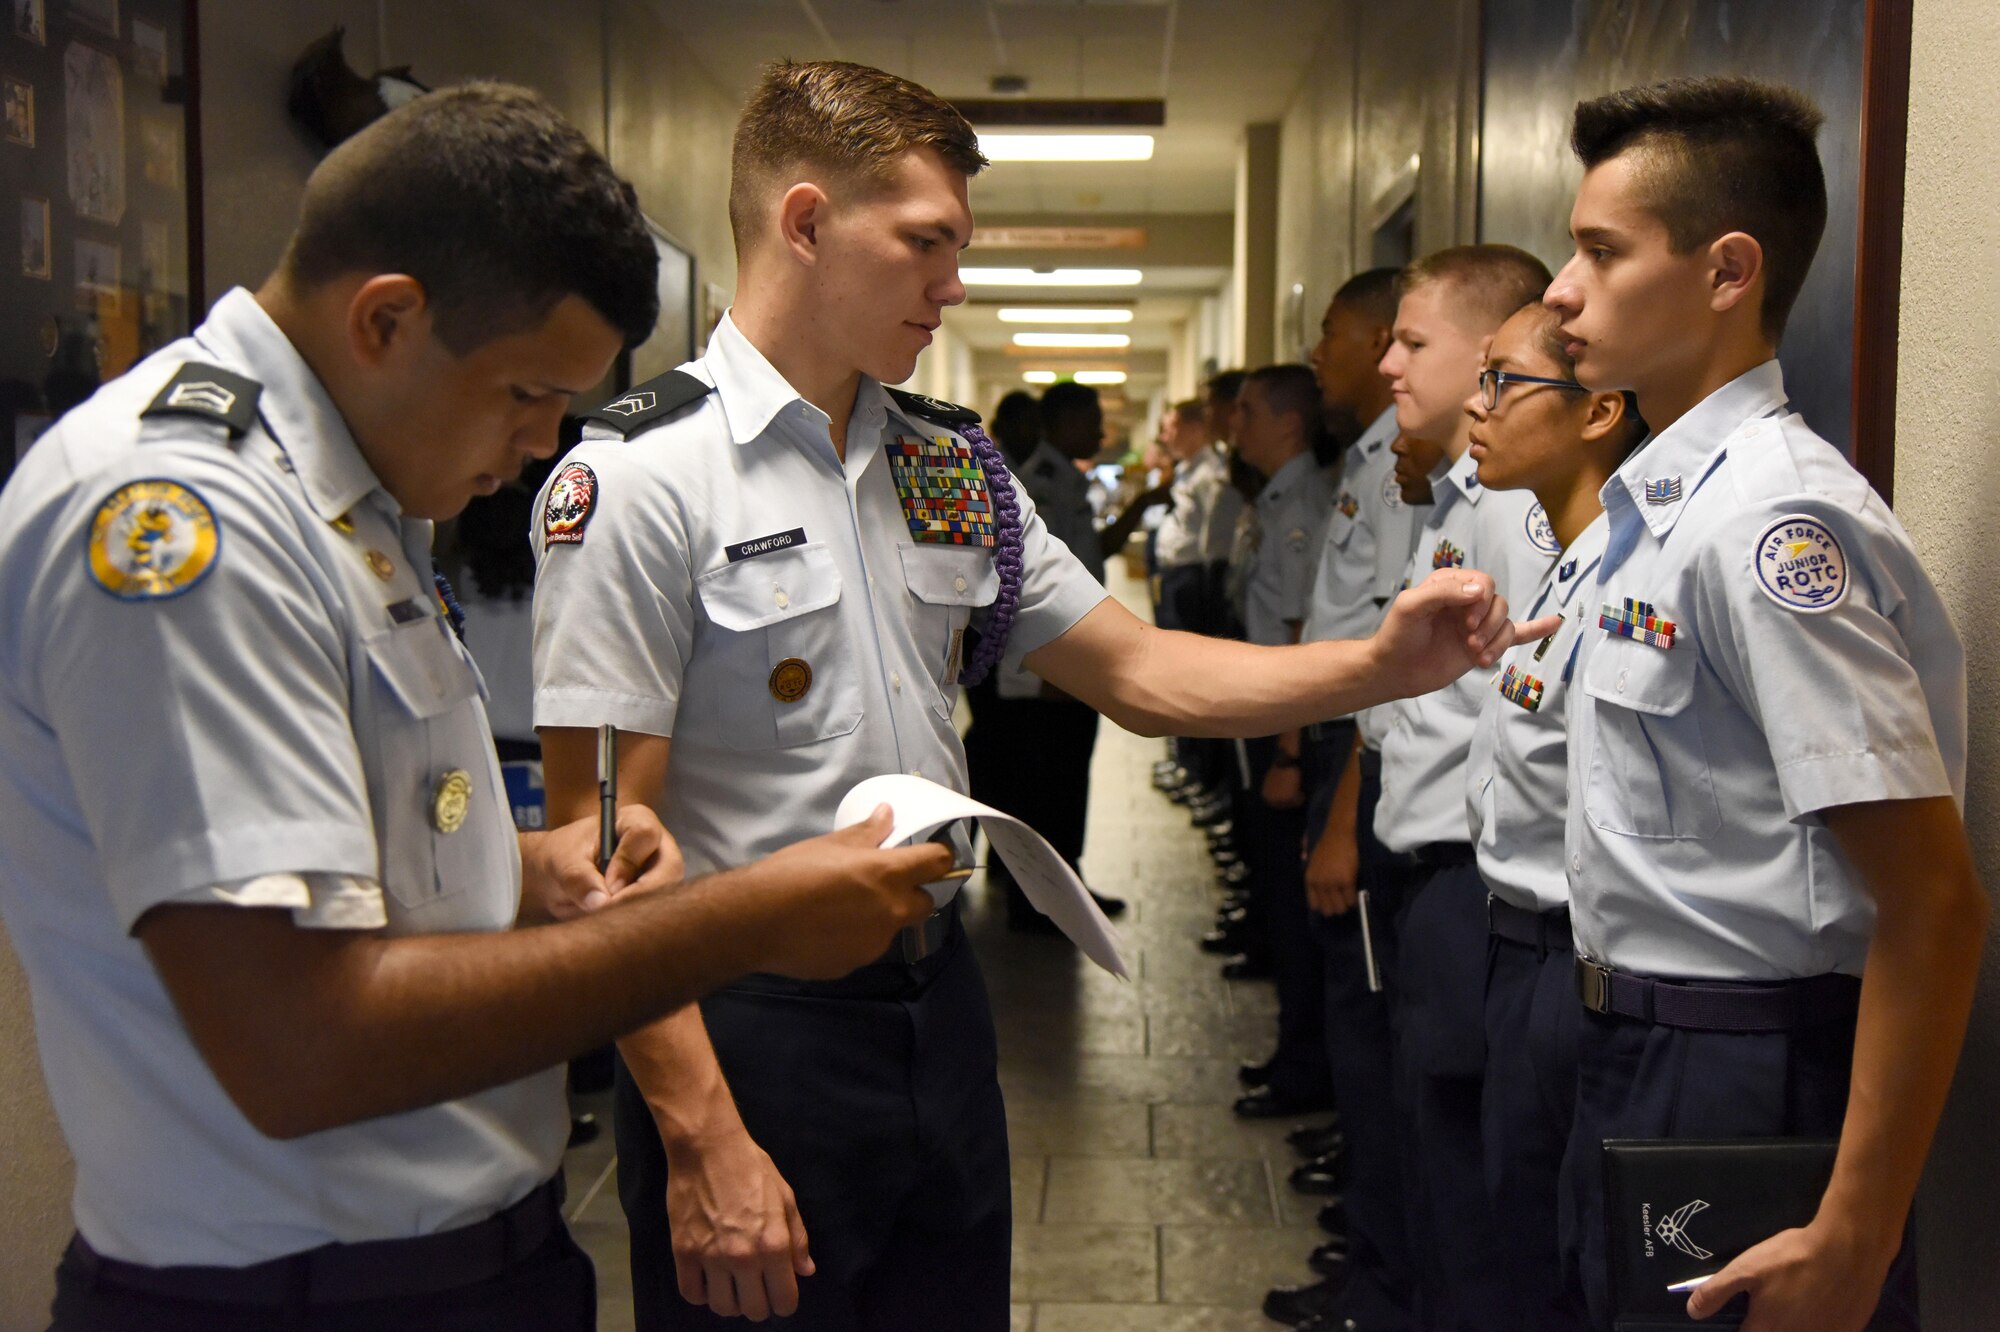 Mississippi Air Force Junior ROTC cadets Natanael Rivera, St. Martin High School, and Kane Crawford, Bay High School, Bay St. Louis, conduct a uniform inspection on Jose Martinez, Biloxi High School, during a JROTC Cadet Leadership Course at the Mathies NCO Academy July 12, 2017, on Keesler Air Force Base, Miss. Approximately 140 JROTC students from 15 high schools in five states attended the week-long course at Keesler that ended with a parade and graduation ceremony. (U.S. Air Force photo by Kemberly Groue)